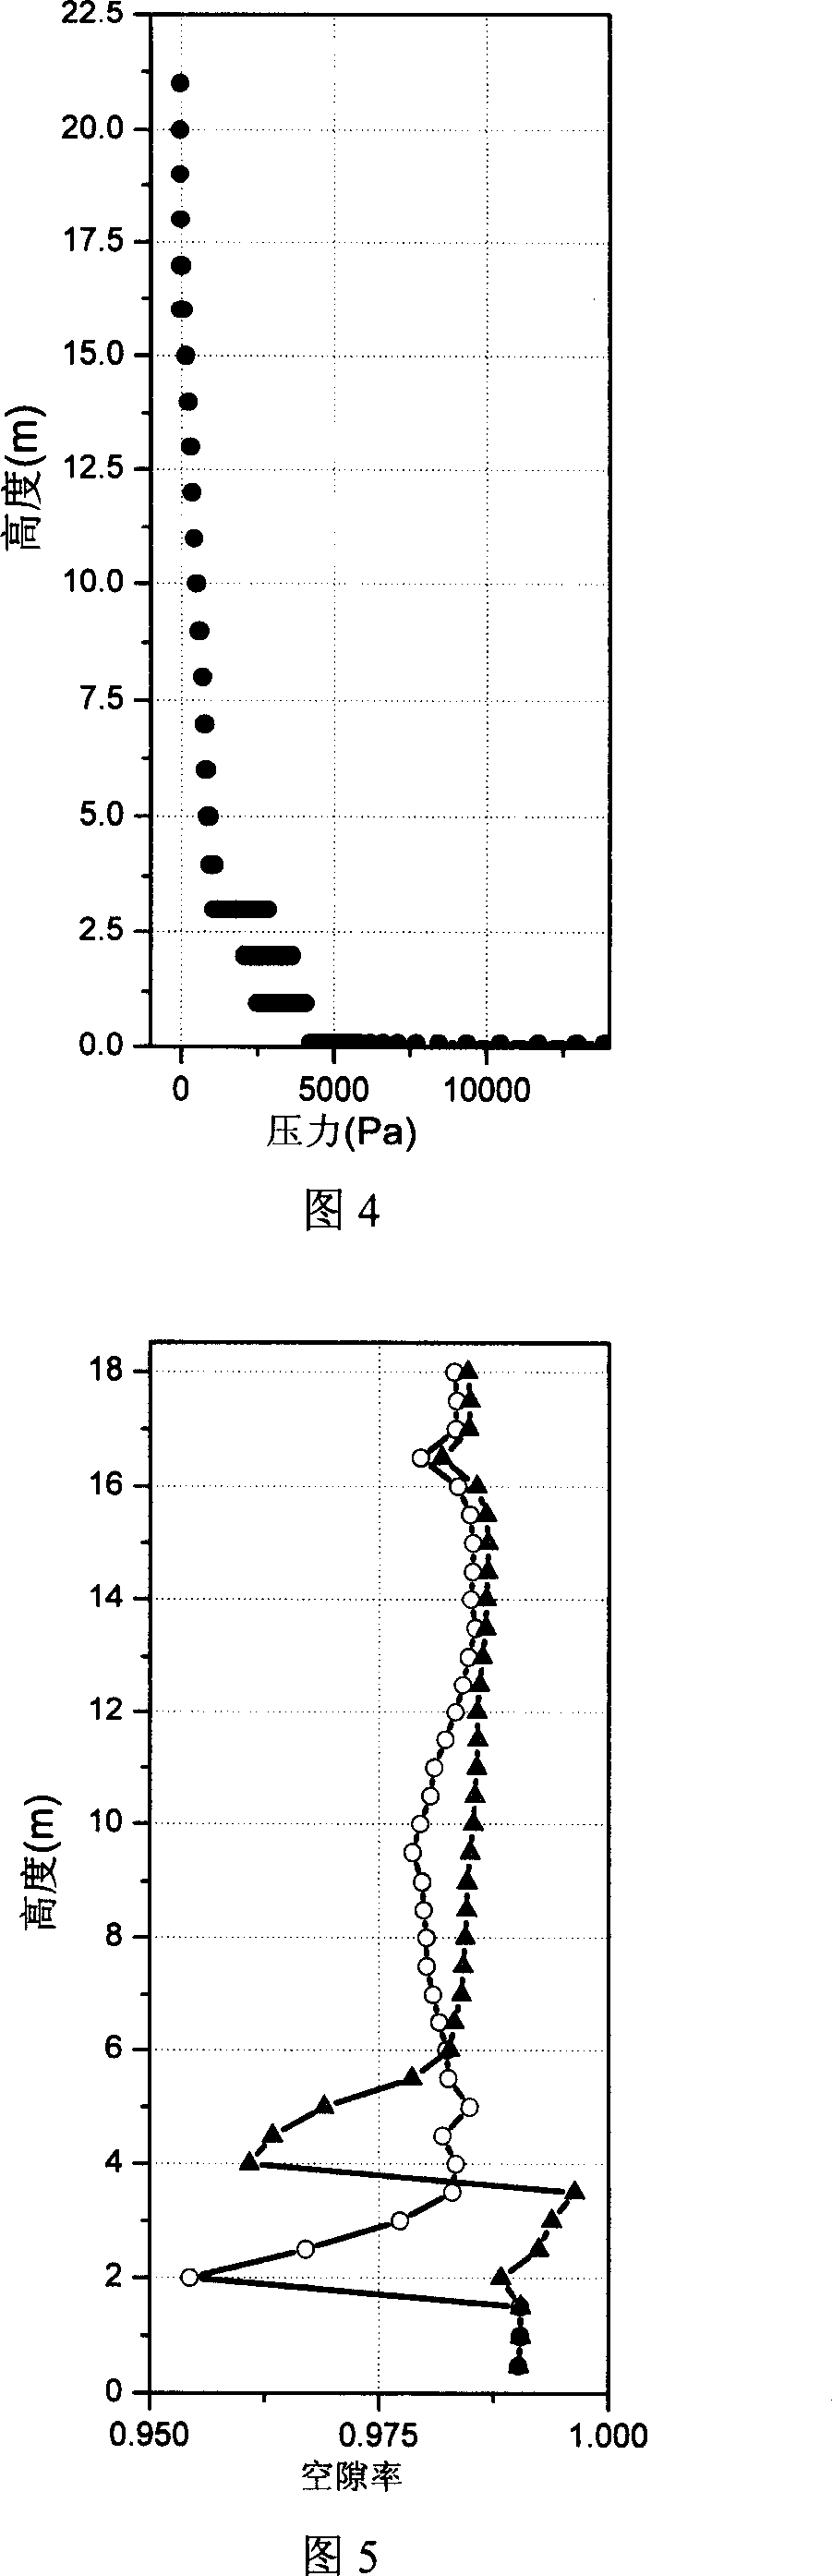 Method for measuring flow parameter distribution in particle flow two-phase flow reactor